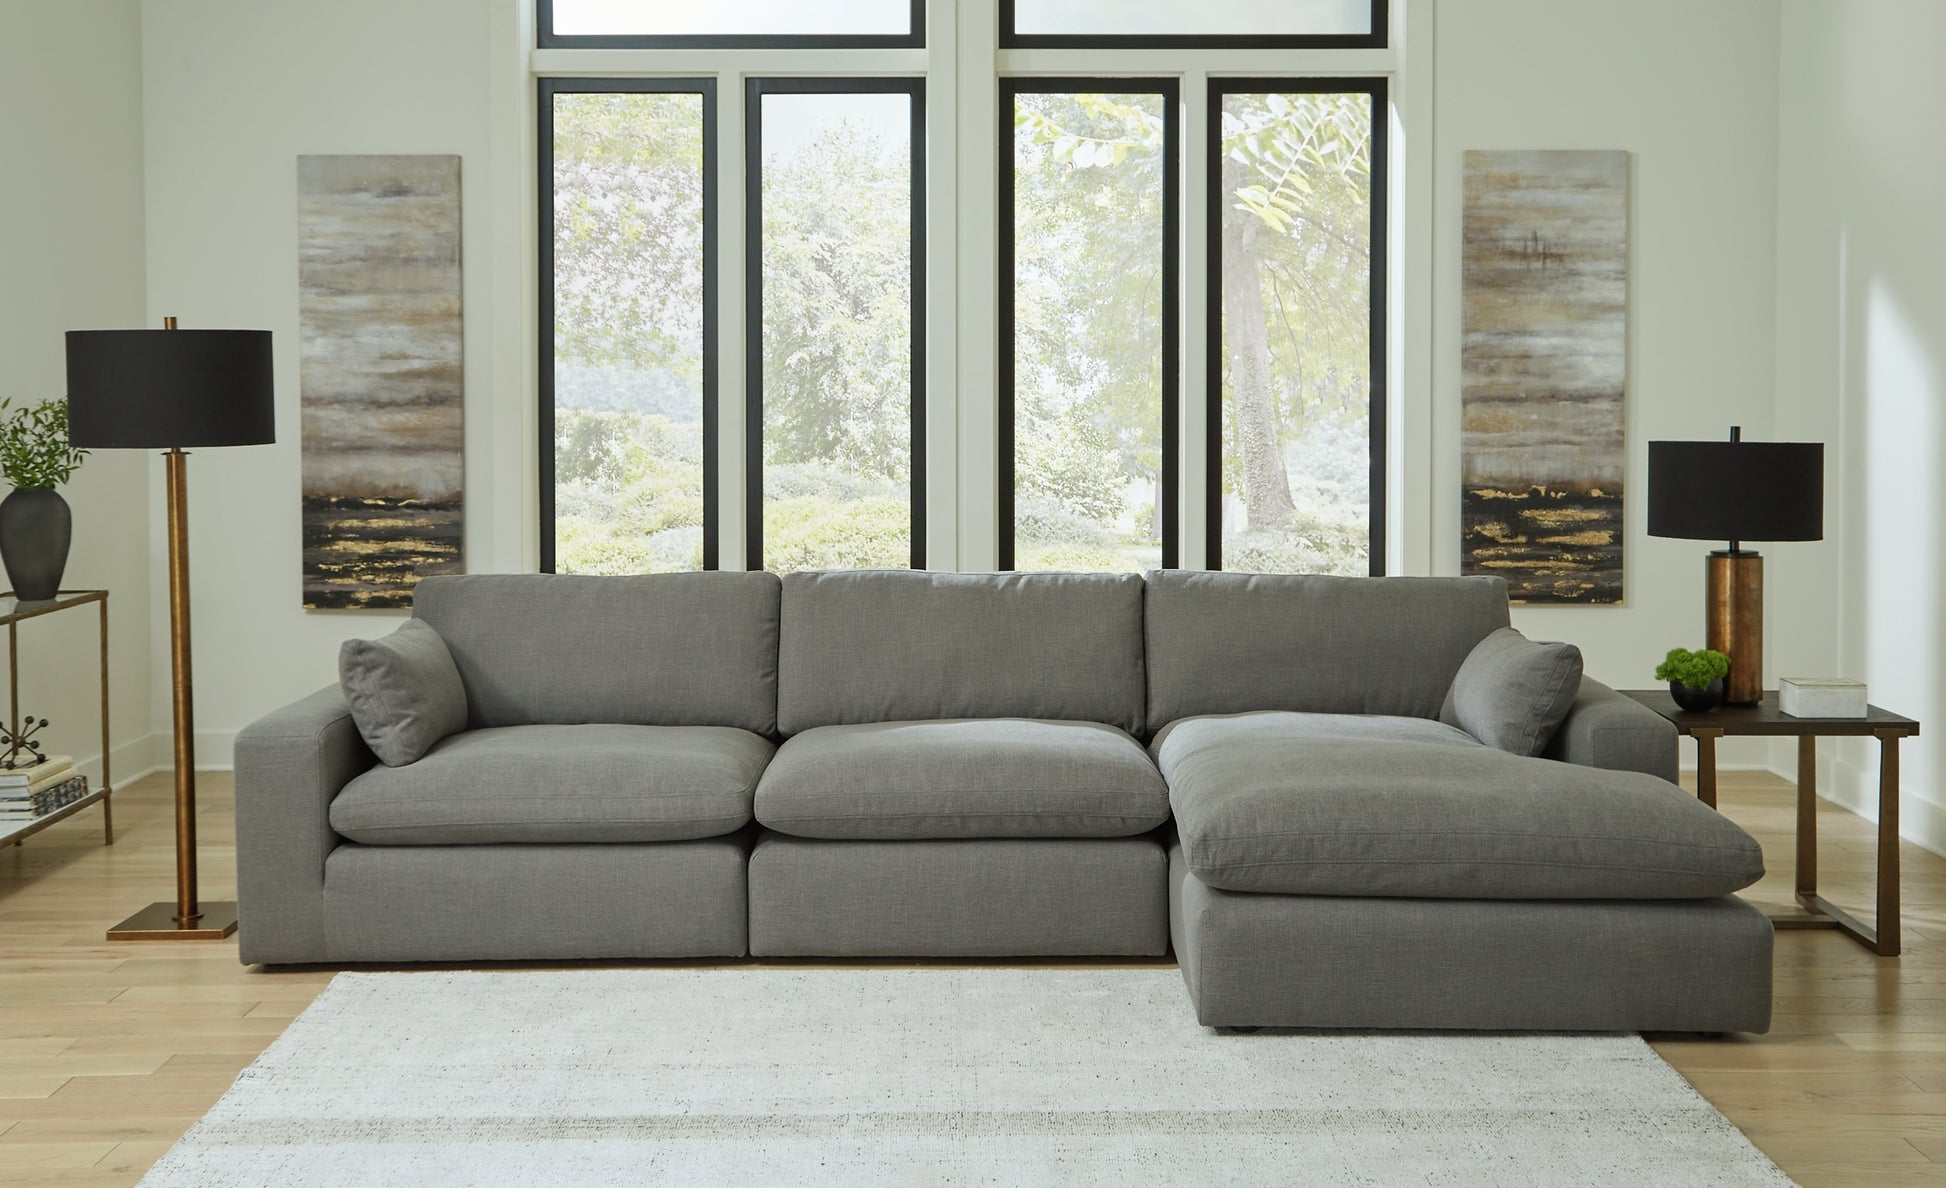 Elyza 3-Piece Sectional with Chaise Wilson Furniture (OH)  in Bridgeport, Ohio. Serving Bridgeport, Yorkville, Bellaire, & Avondale